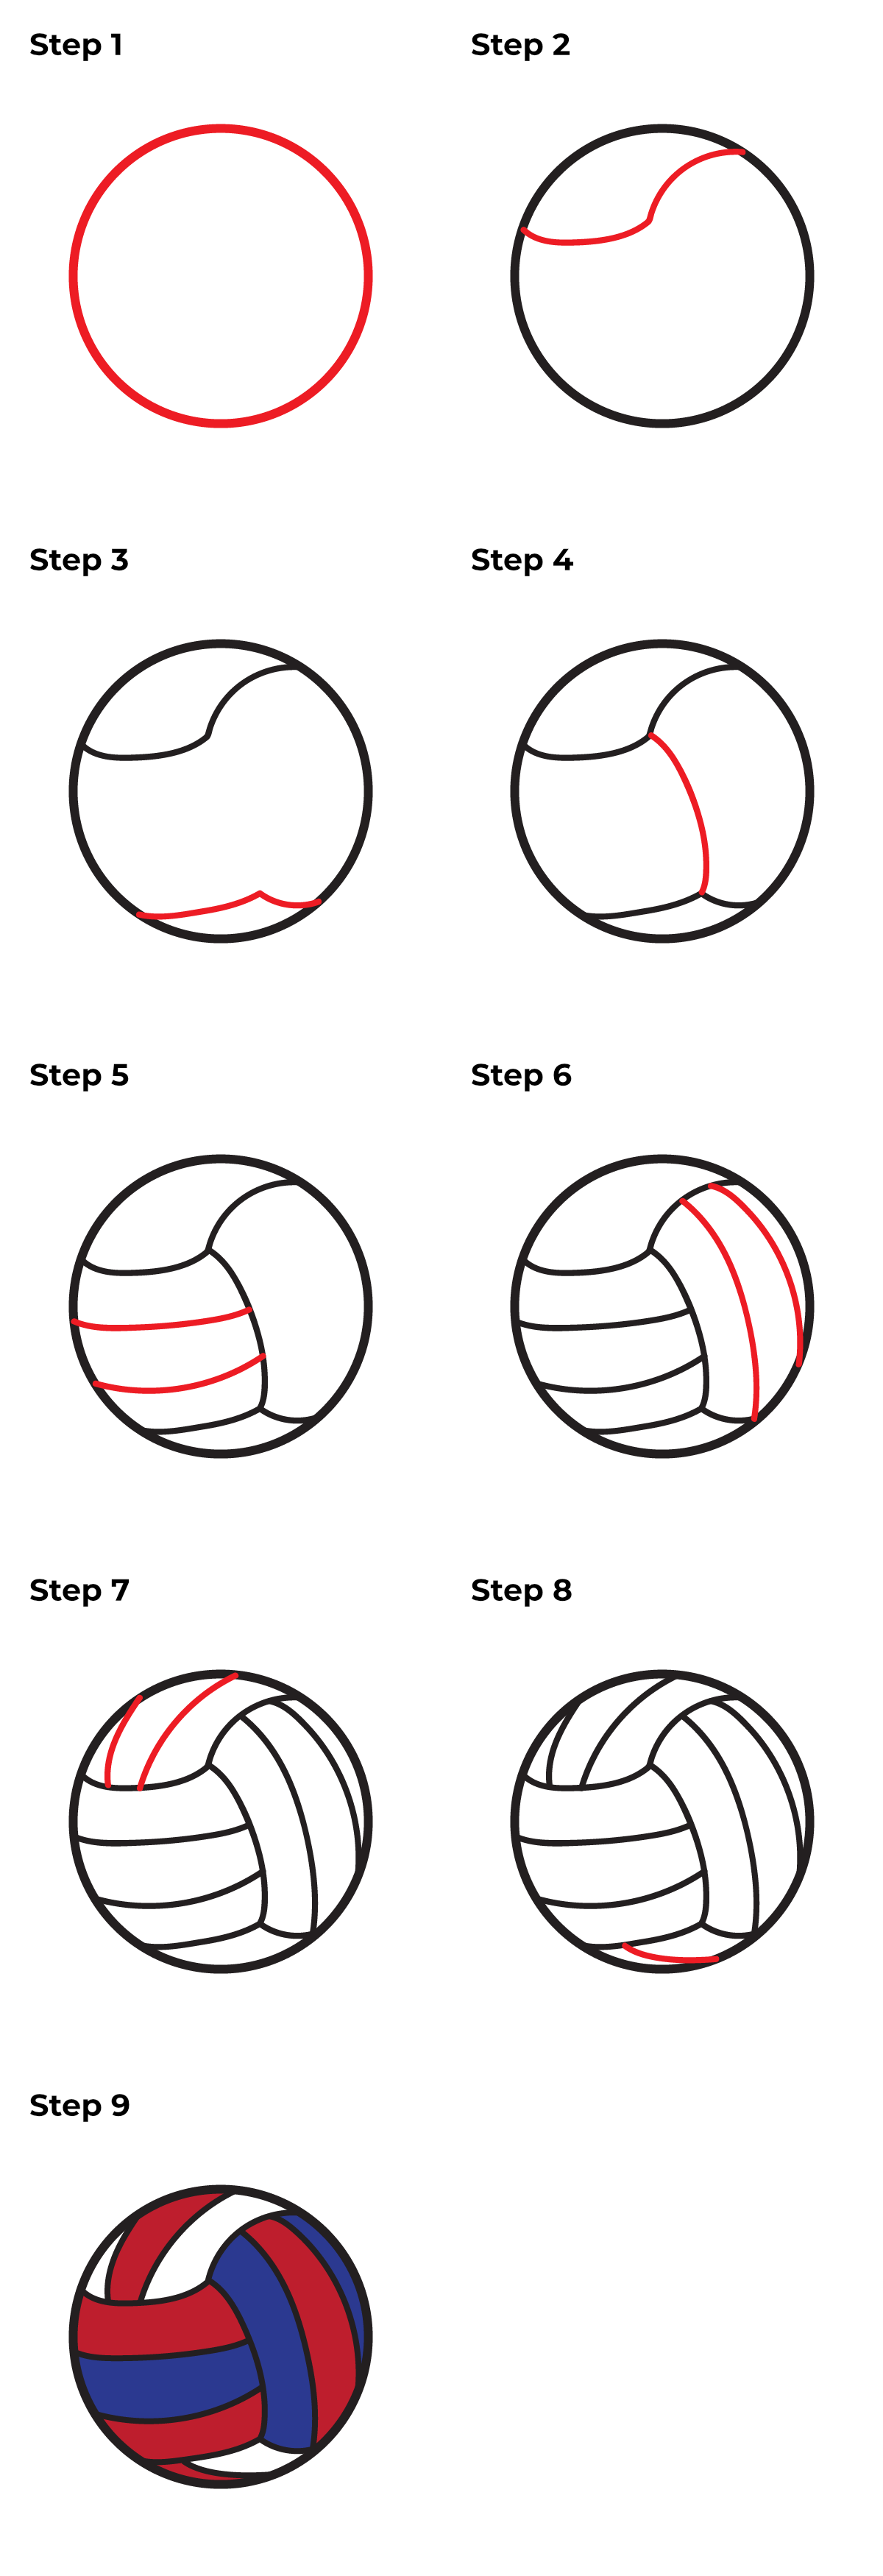 1,251 Sketch Volleyball Player Images, Stock Photos & Vectors | Shutterstock